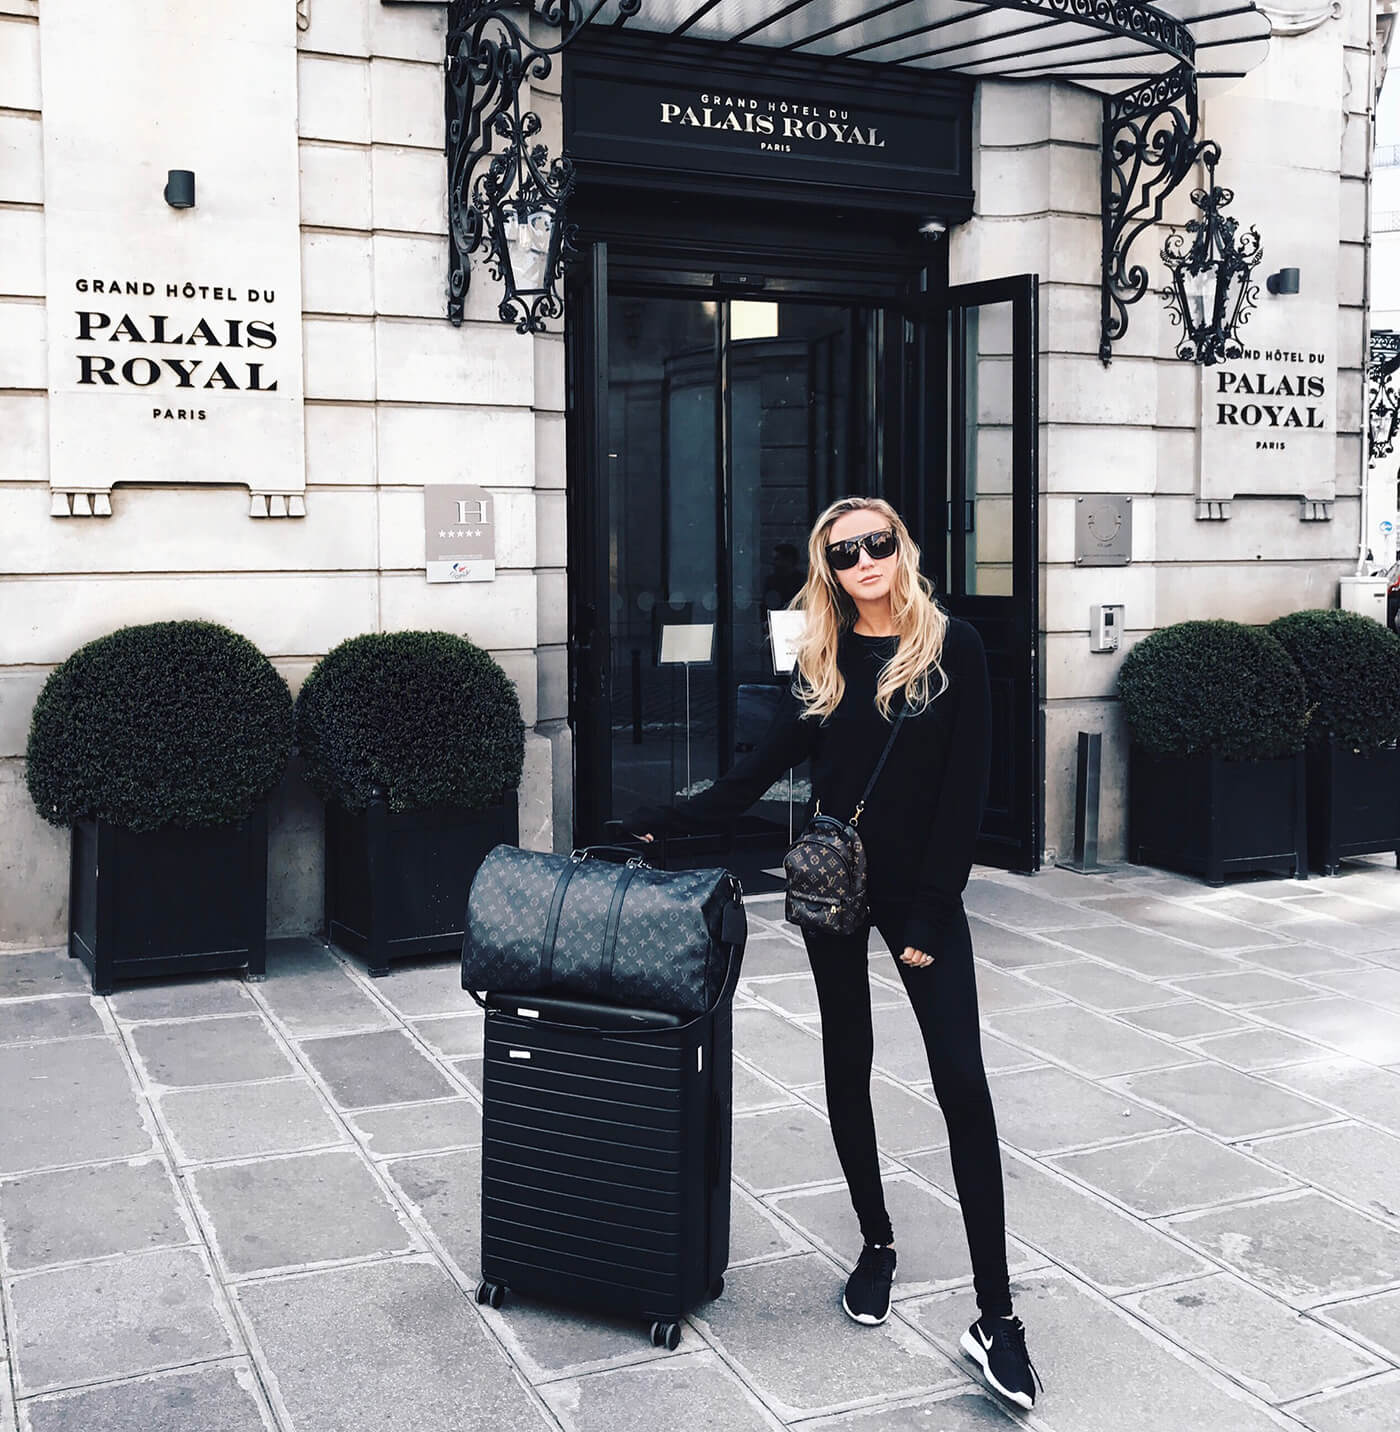 Best Hotel in Paris: Grand Hotel du Palais Royal - Where To Stay in Paris - Best Instagram Hotel Paris - Carly Cristman